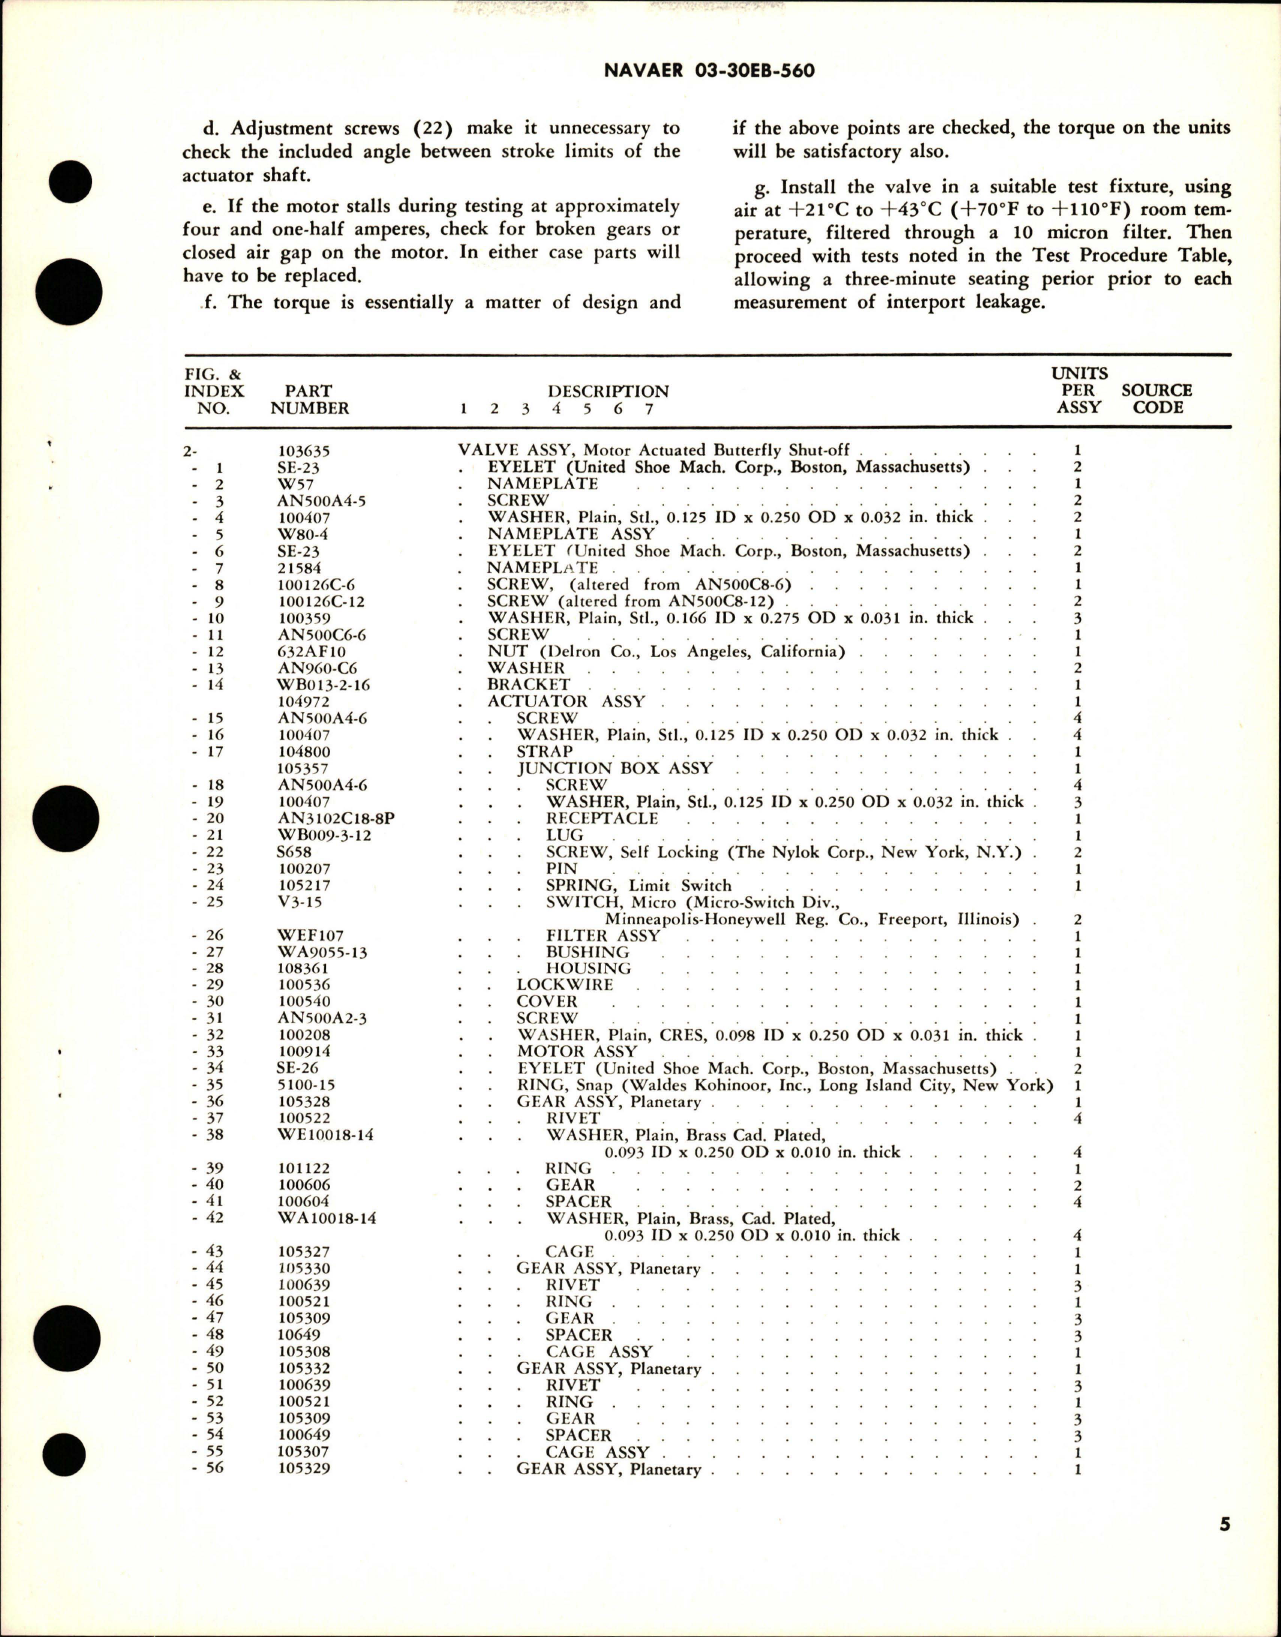 Sample page 5 from AirCorps Library document: Overhaul Instructions with Parts for Motor Actuated Butterfly Shut Off Valve Assembly - Part 103635